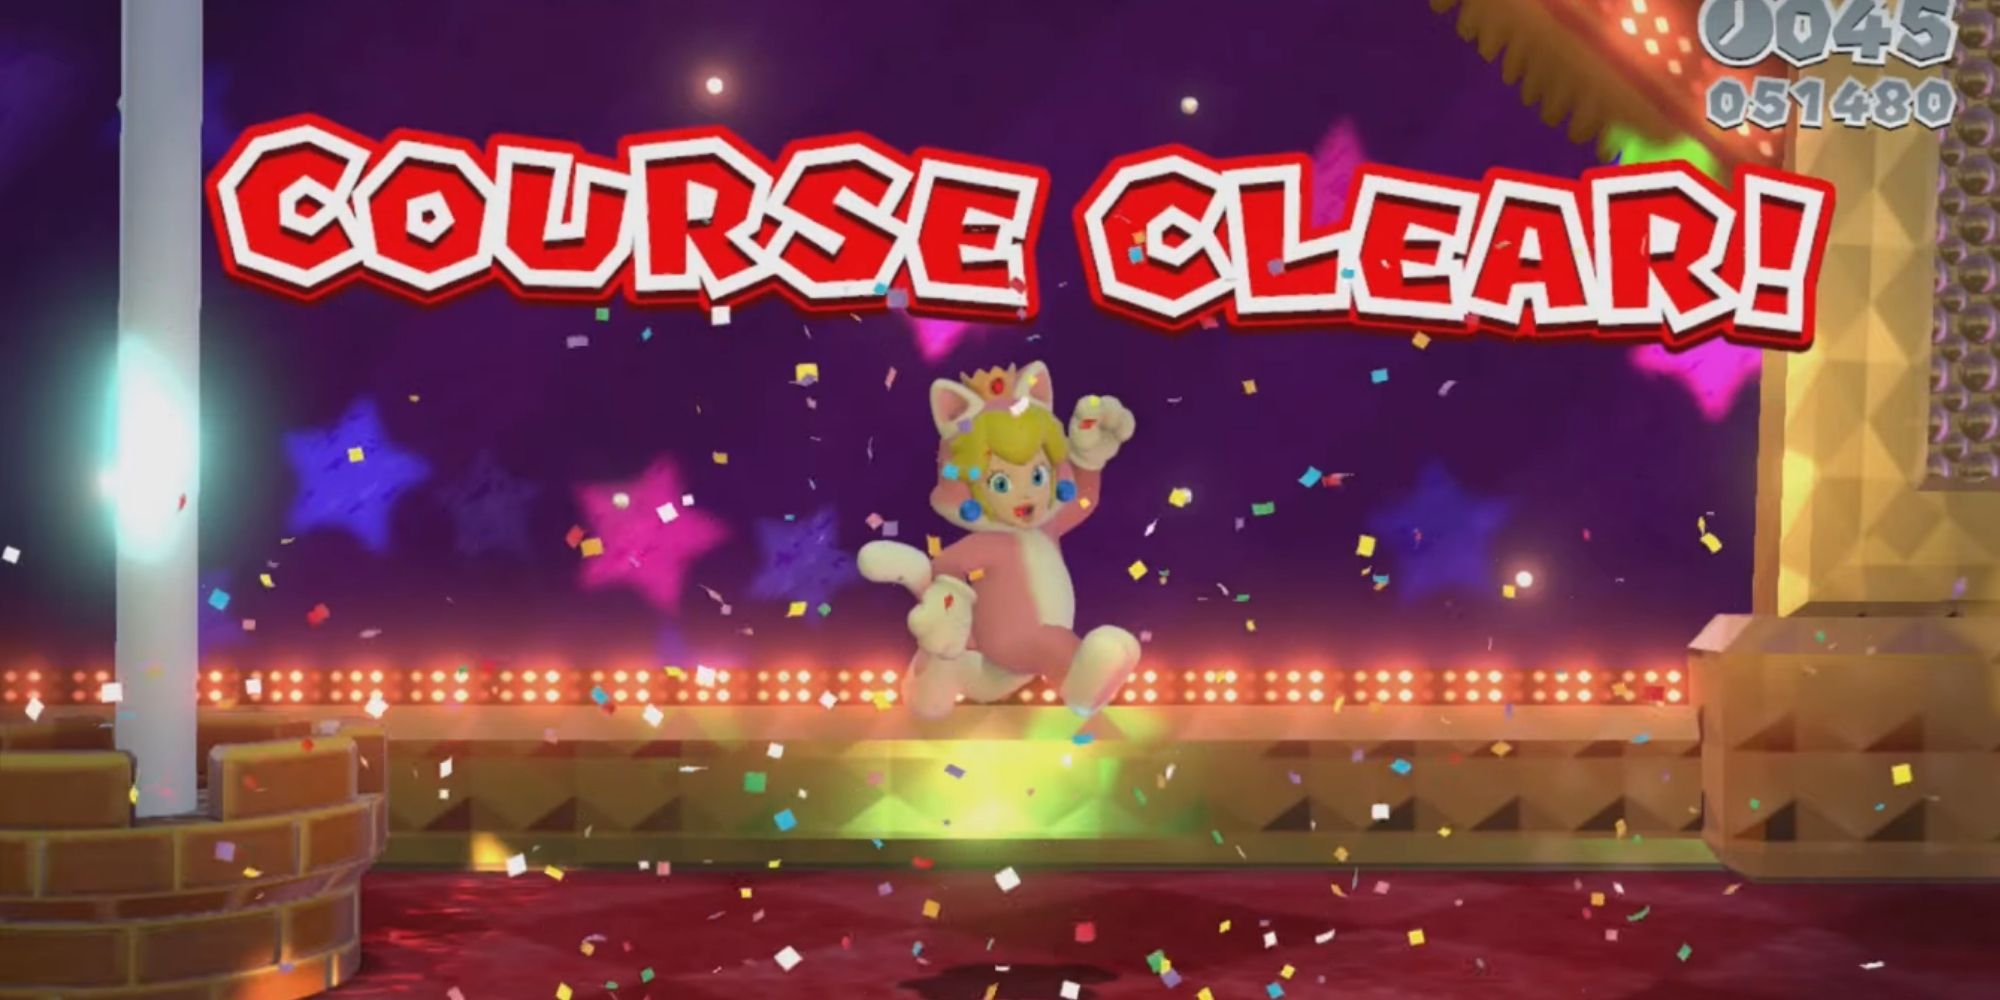 Cat Peach jumps in the air after clearing a stage